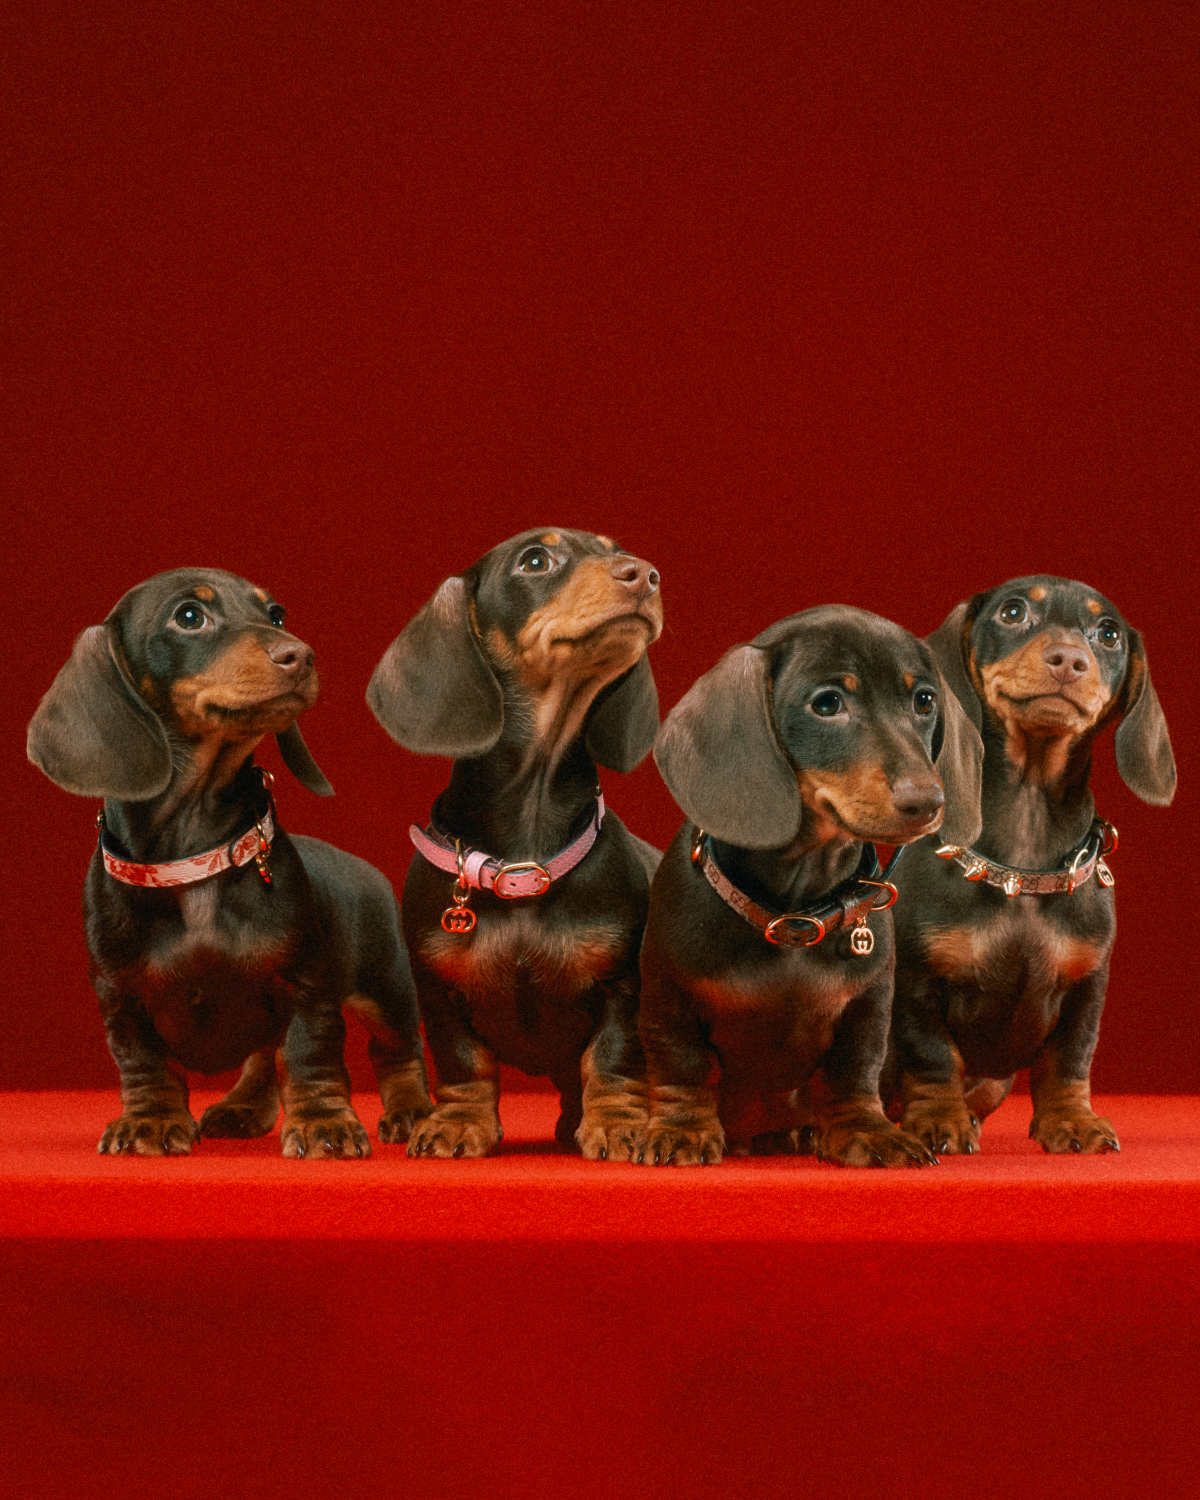 Gucci Introduces Its New Pet Collection